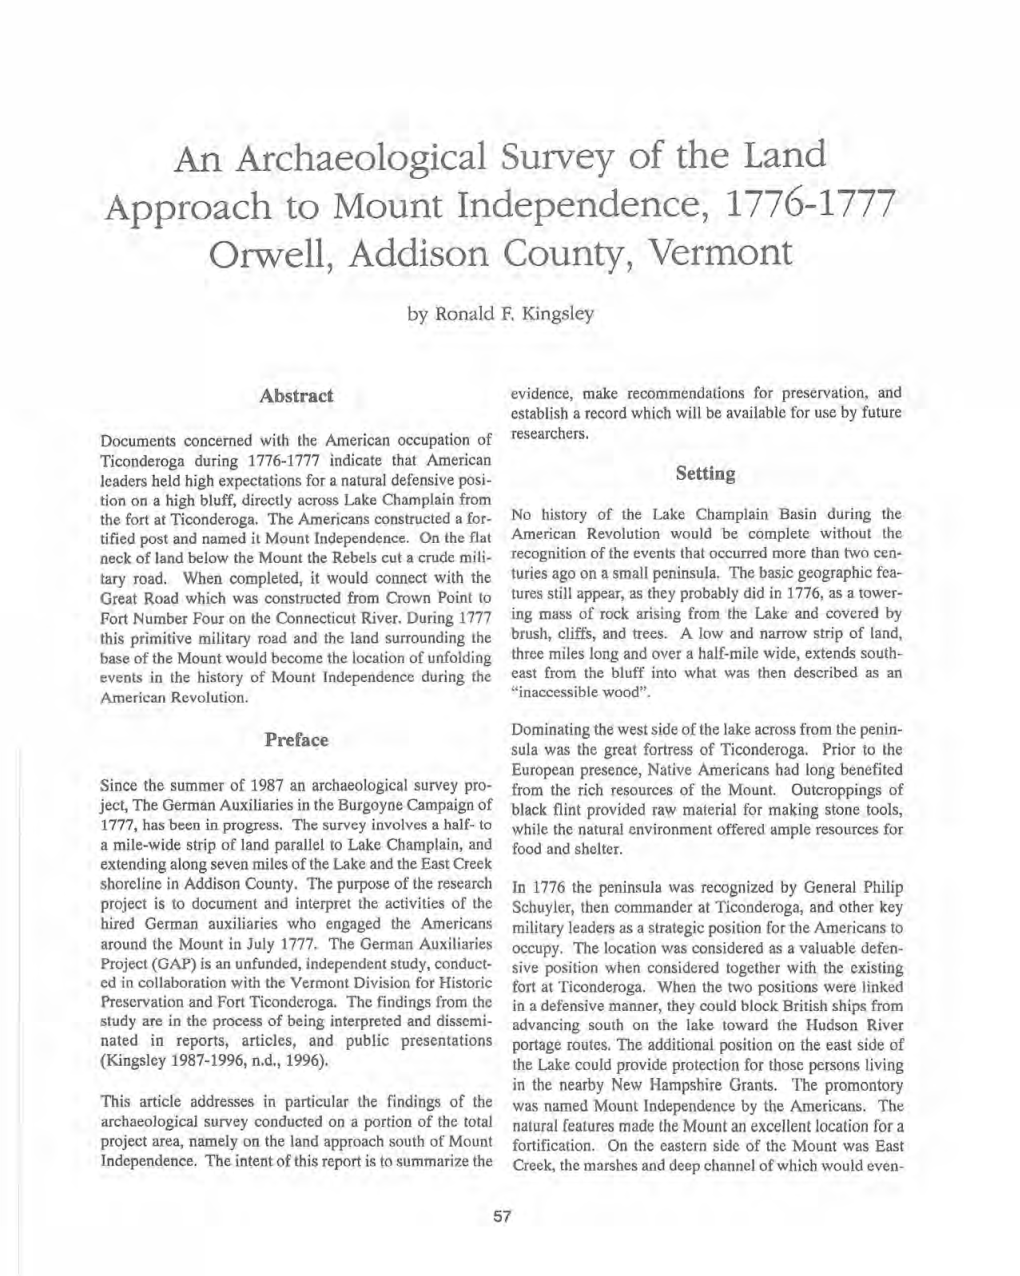 An Archaeological Survey of the Land Approach to Mount Independence, 1776-1777 Orwell, Addison County, Vermont